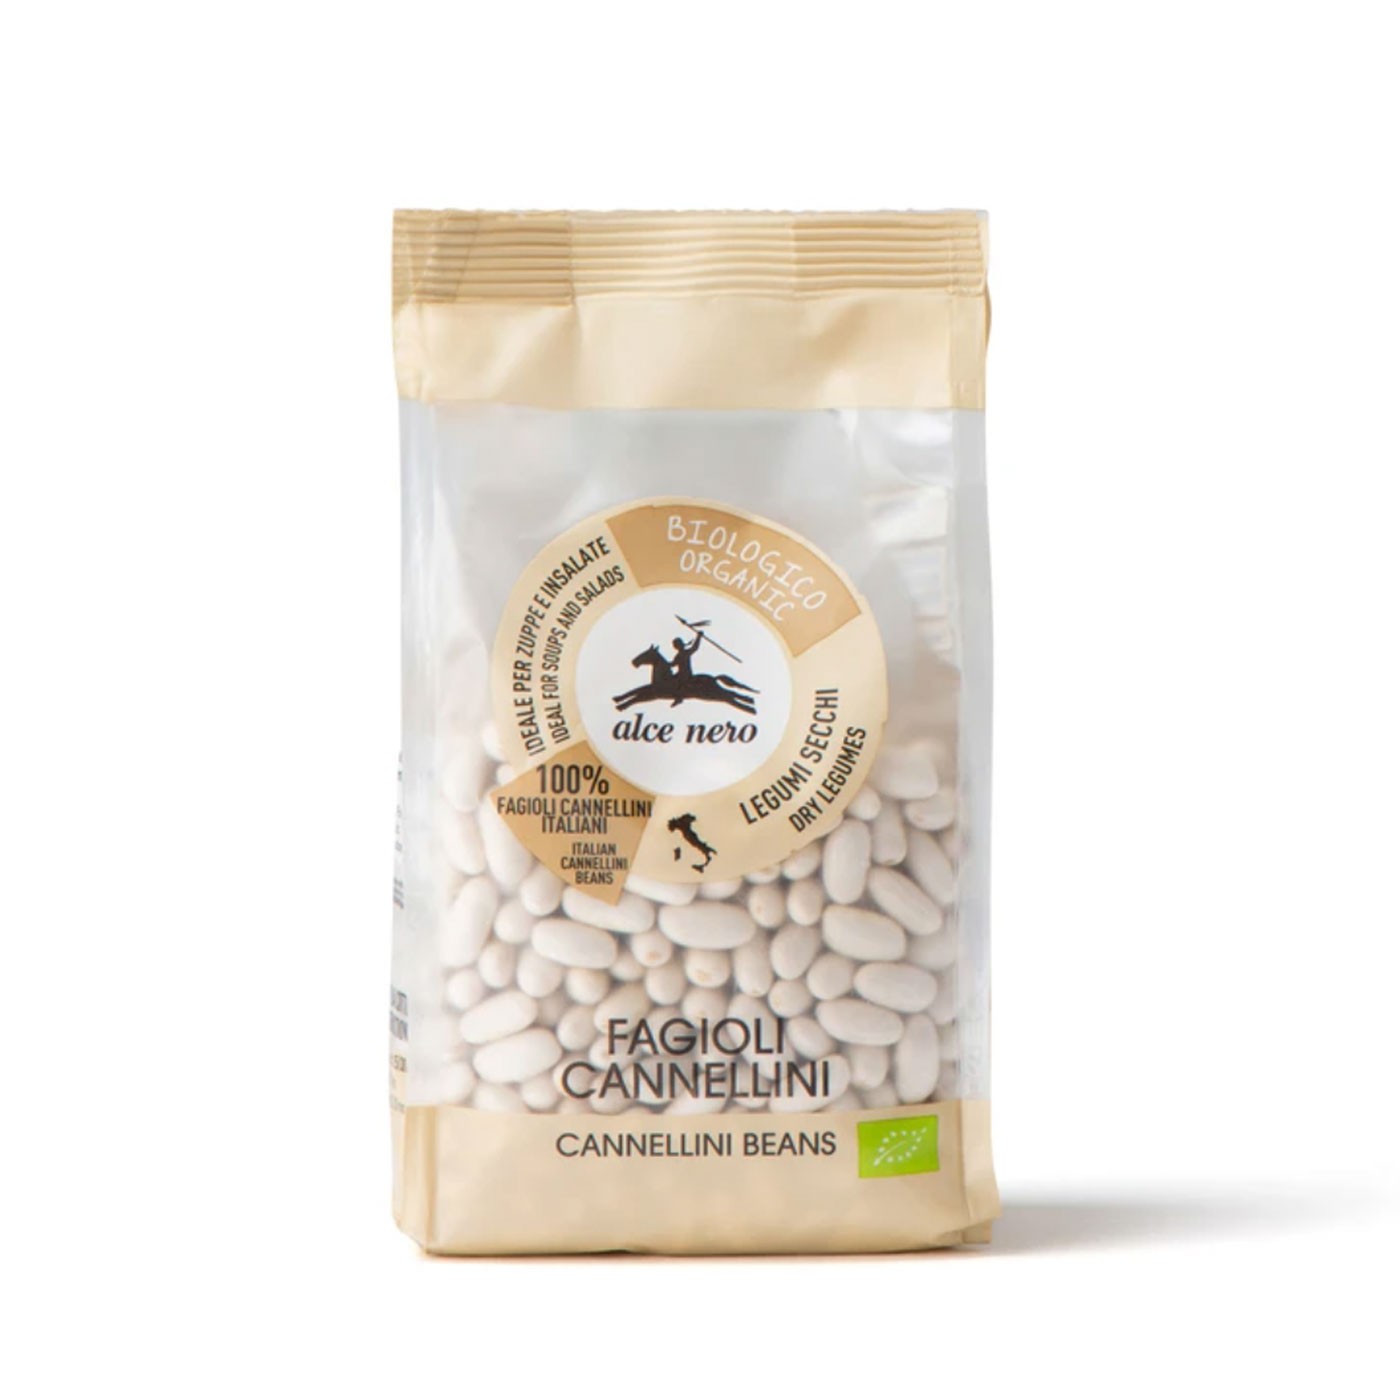 Dried Cannellini Beans 14.1 oz